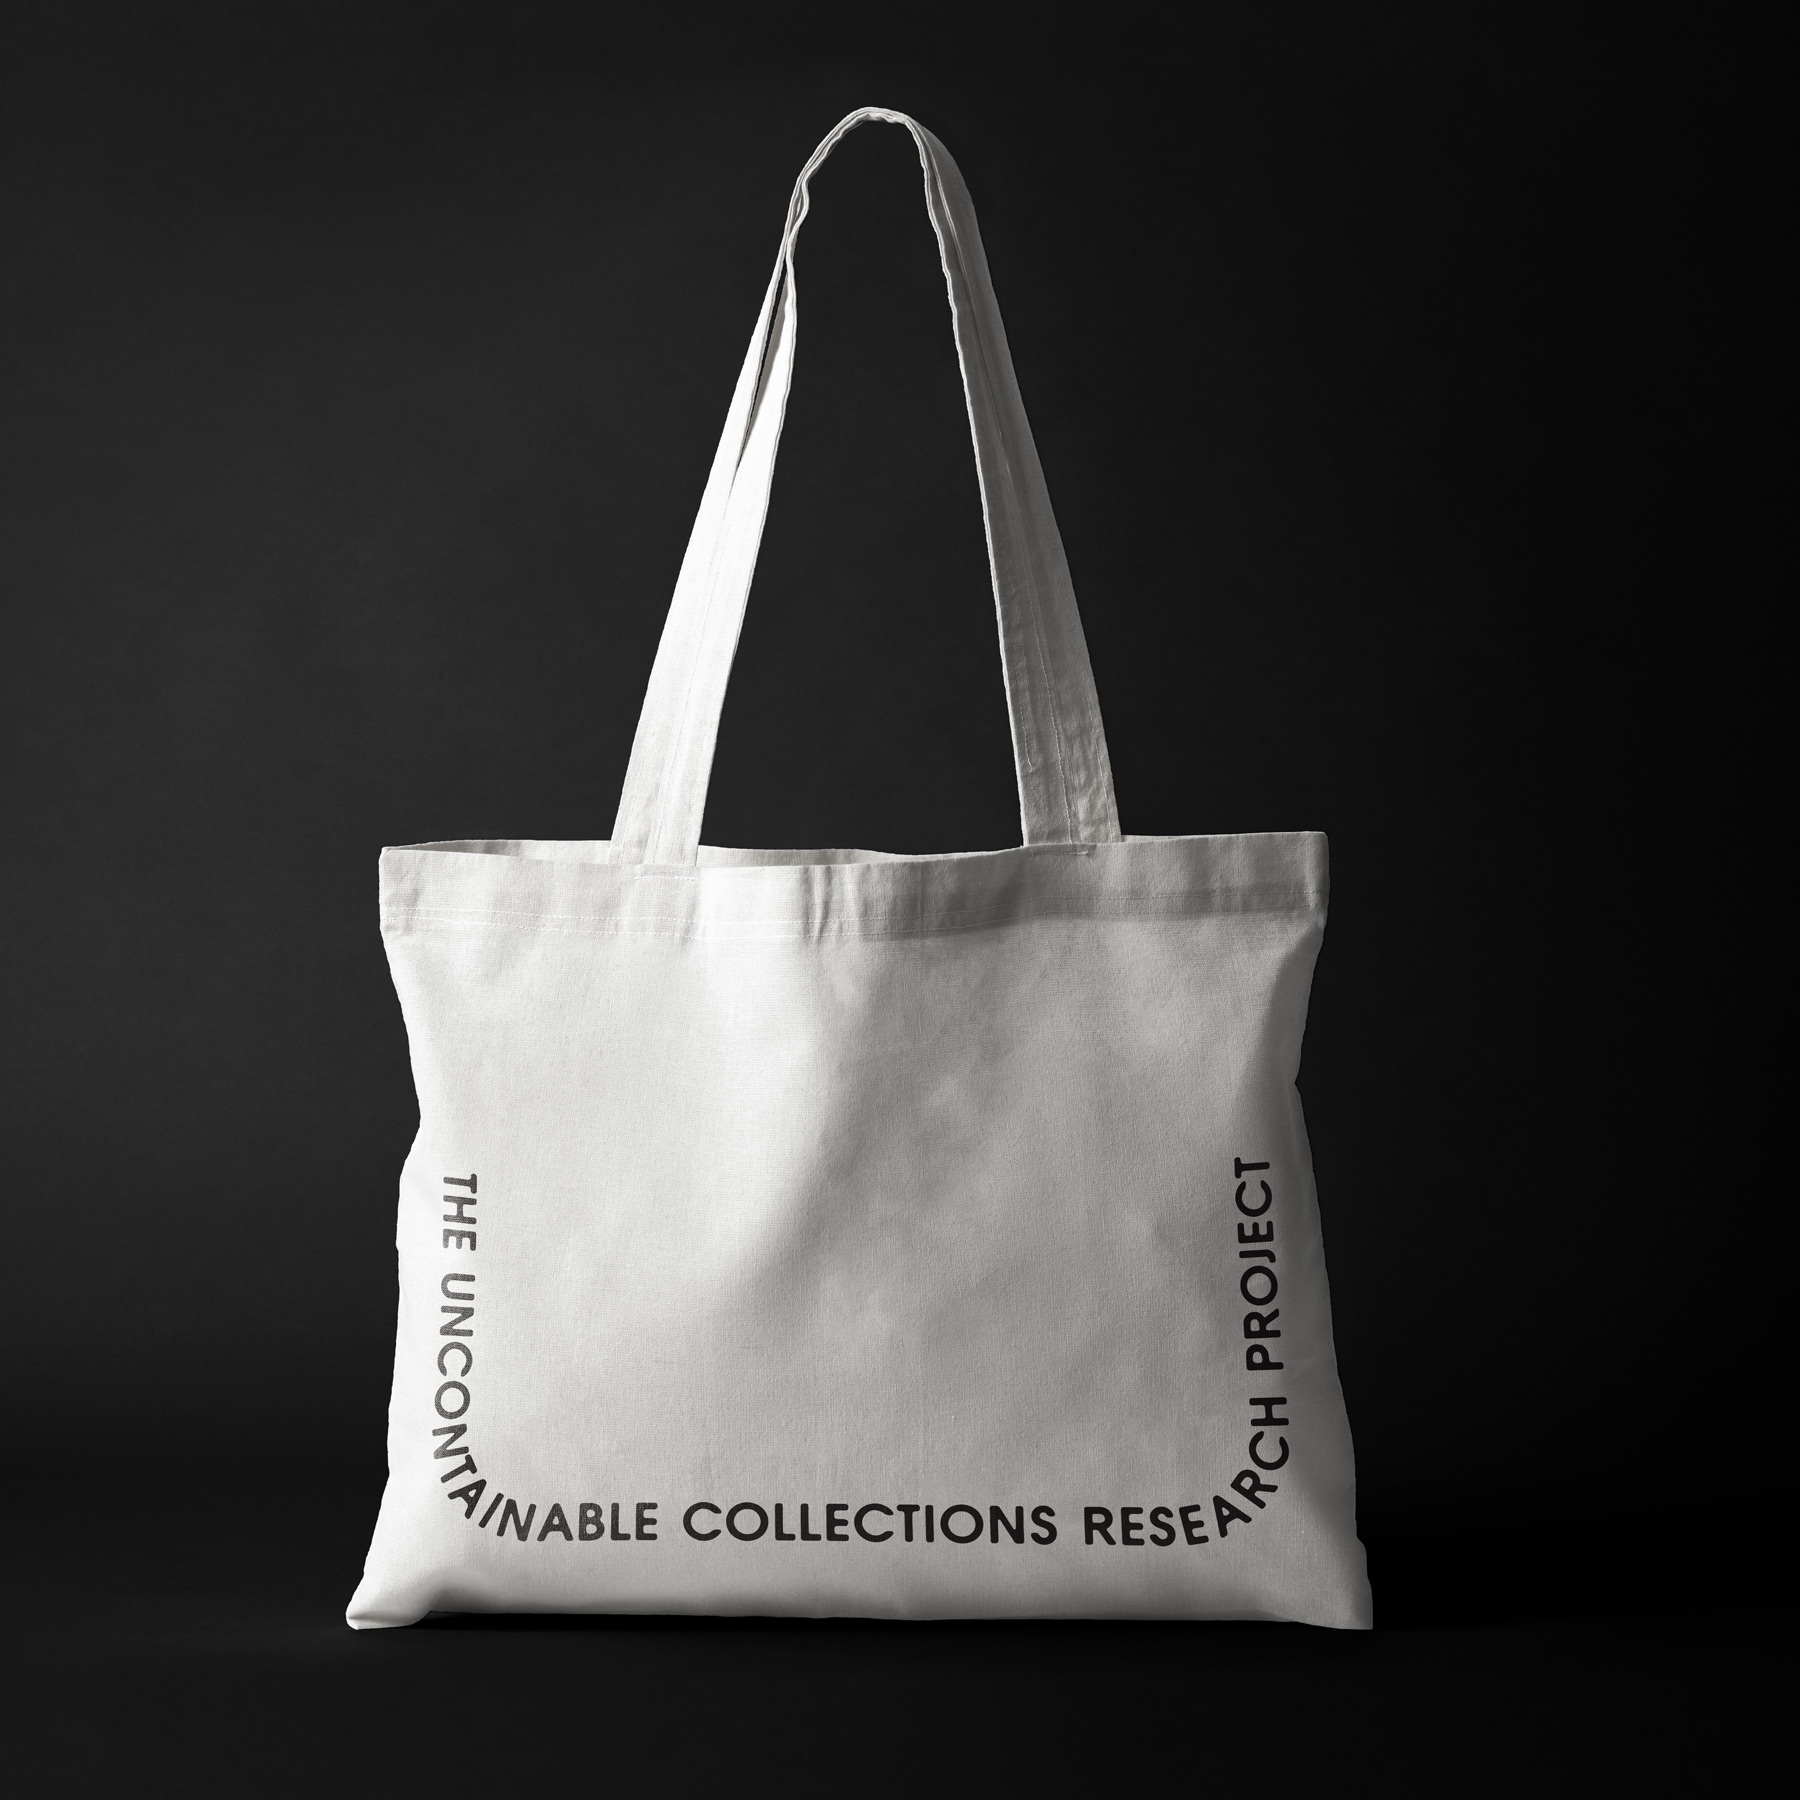 AGYU Uncontainable Research Project Tote Bag by Marta Ryczko